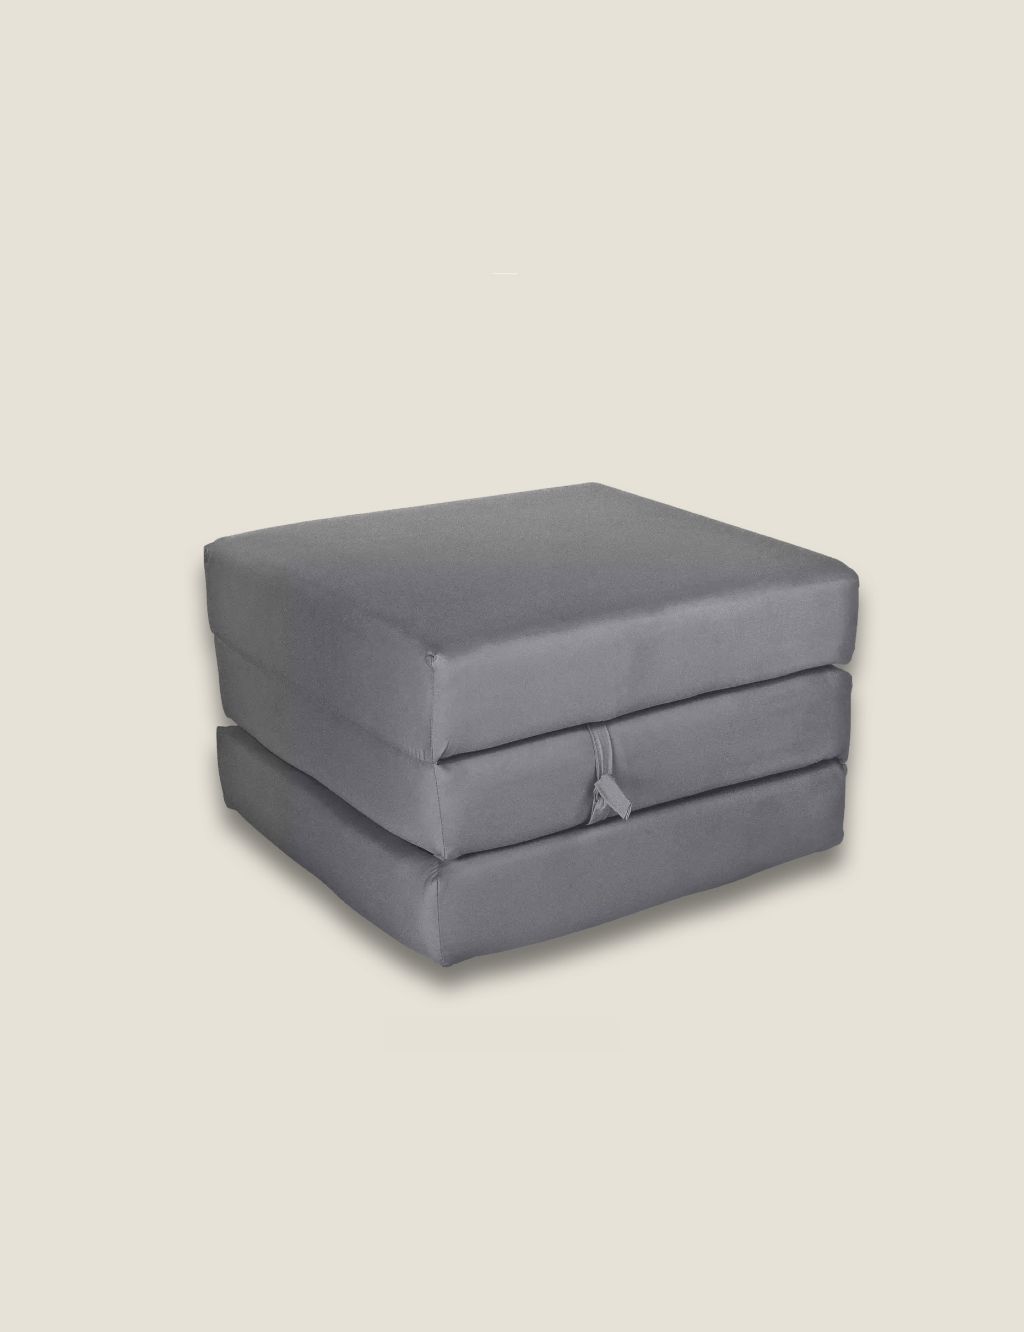 Grey Single Cube Chairbed